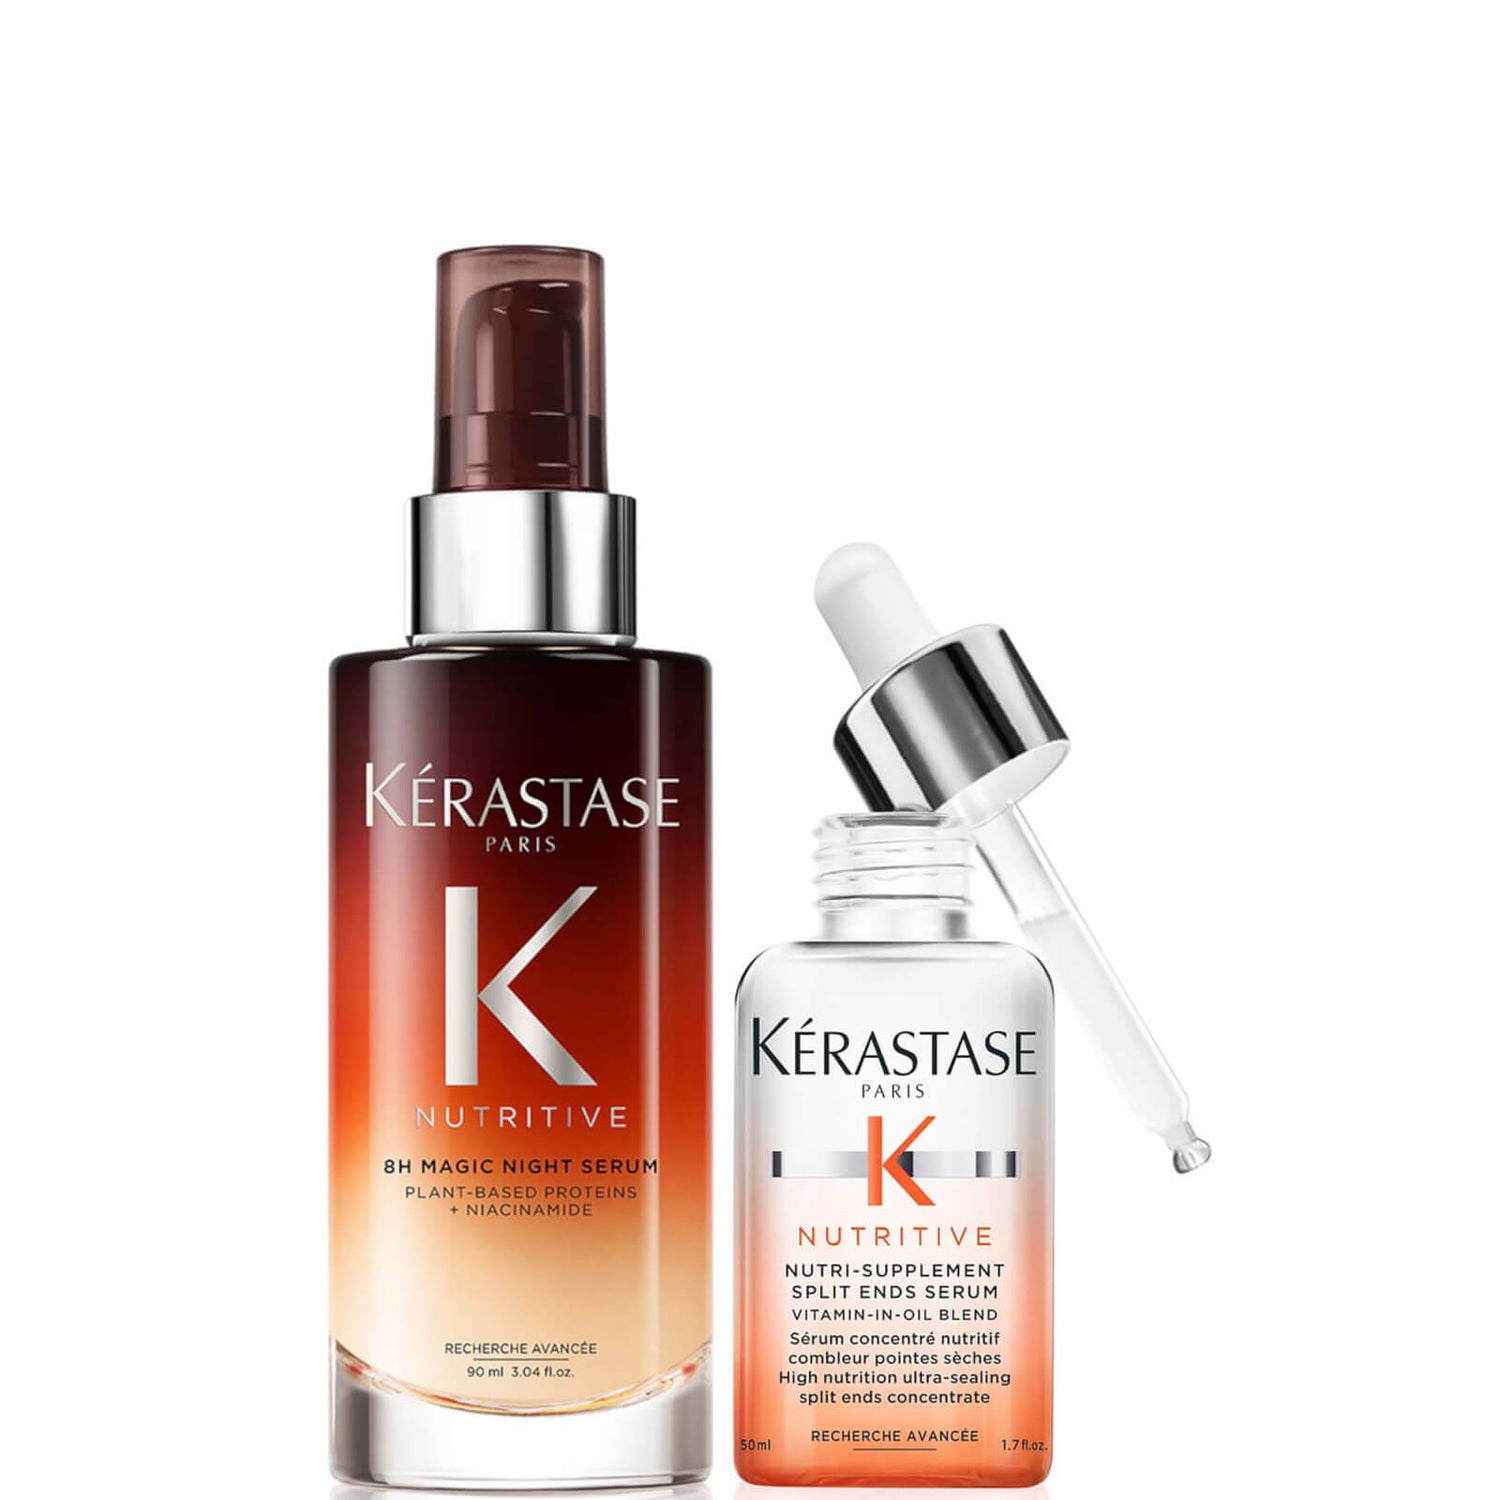 Kérastase Nutritive Nourishment Boosters Duo for Dry Hair